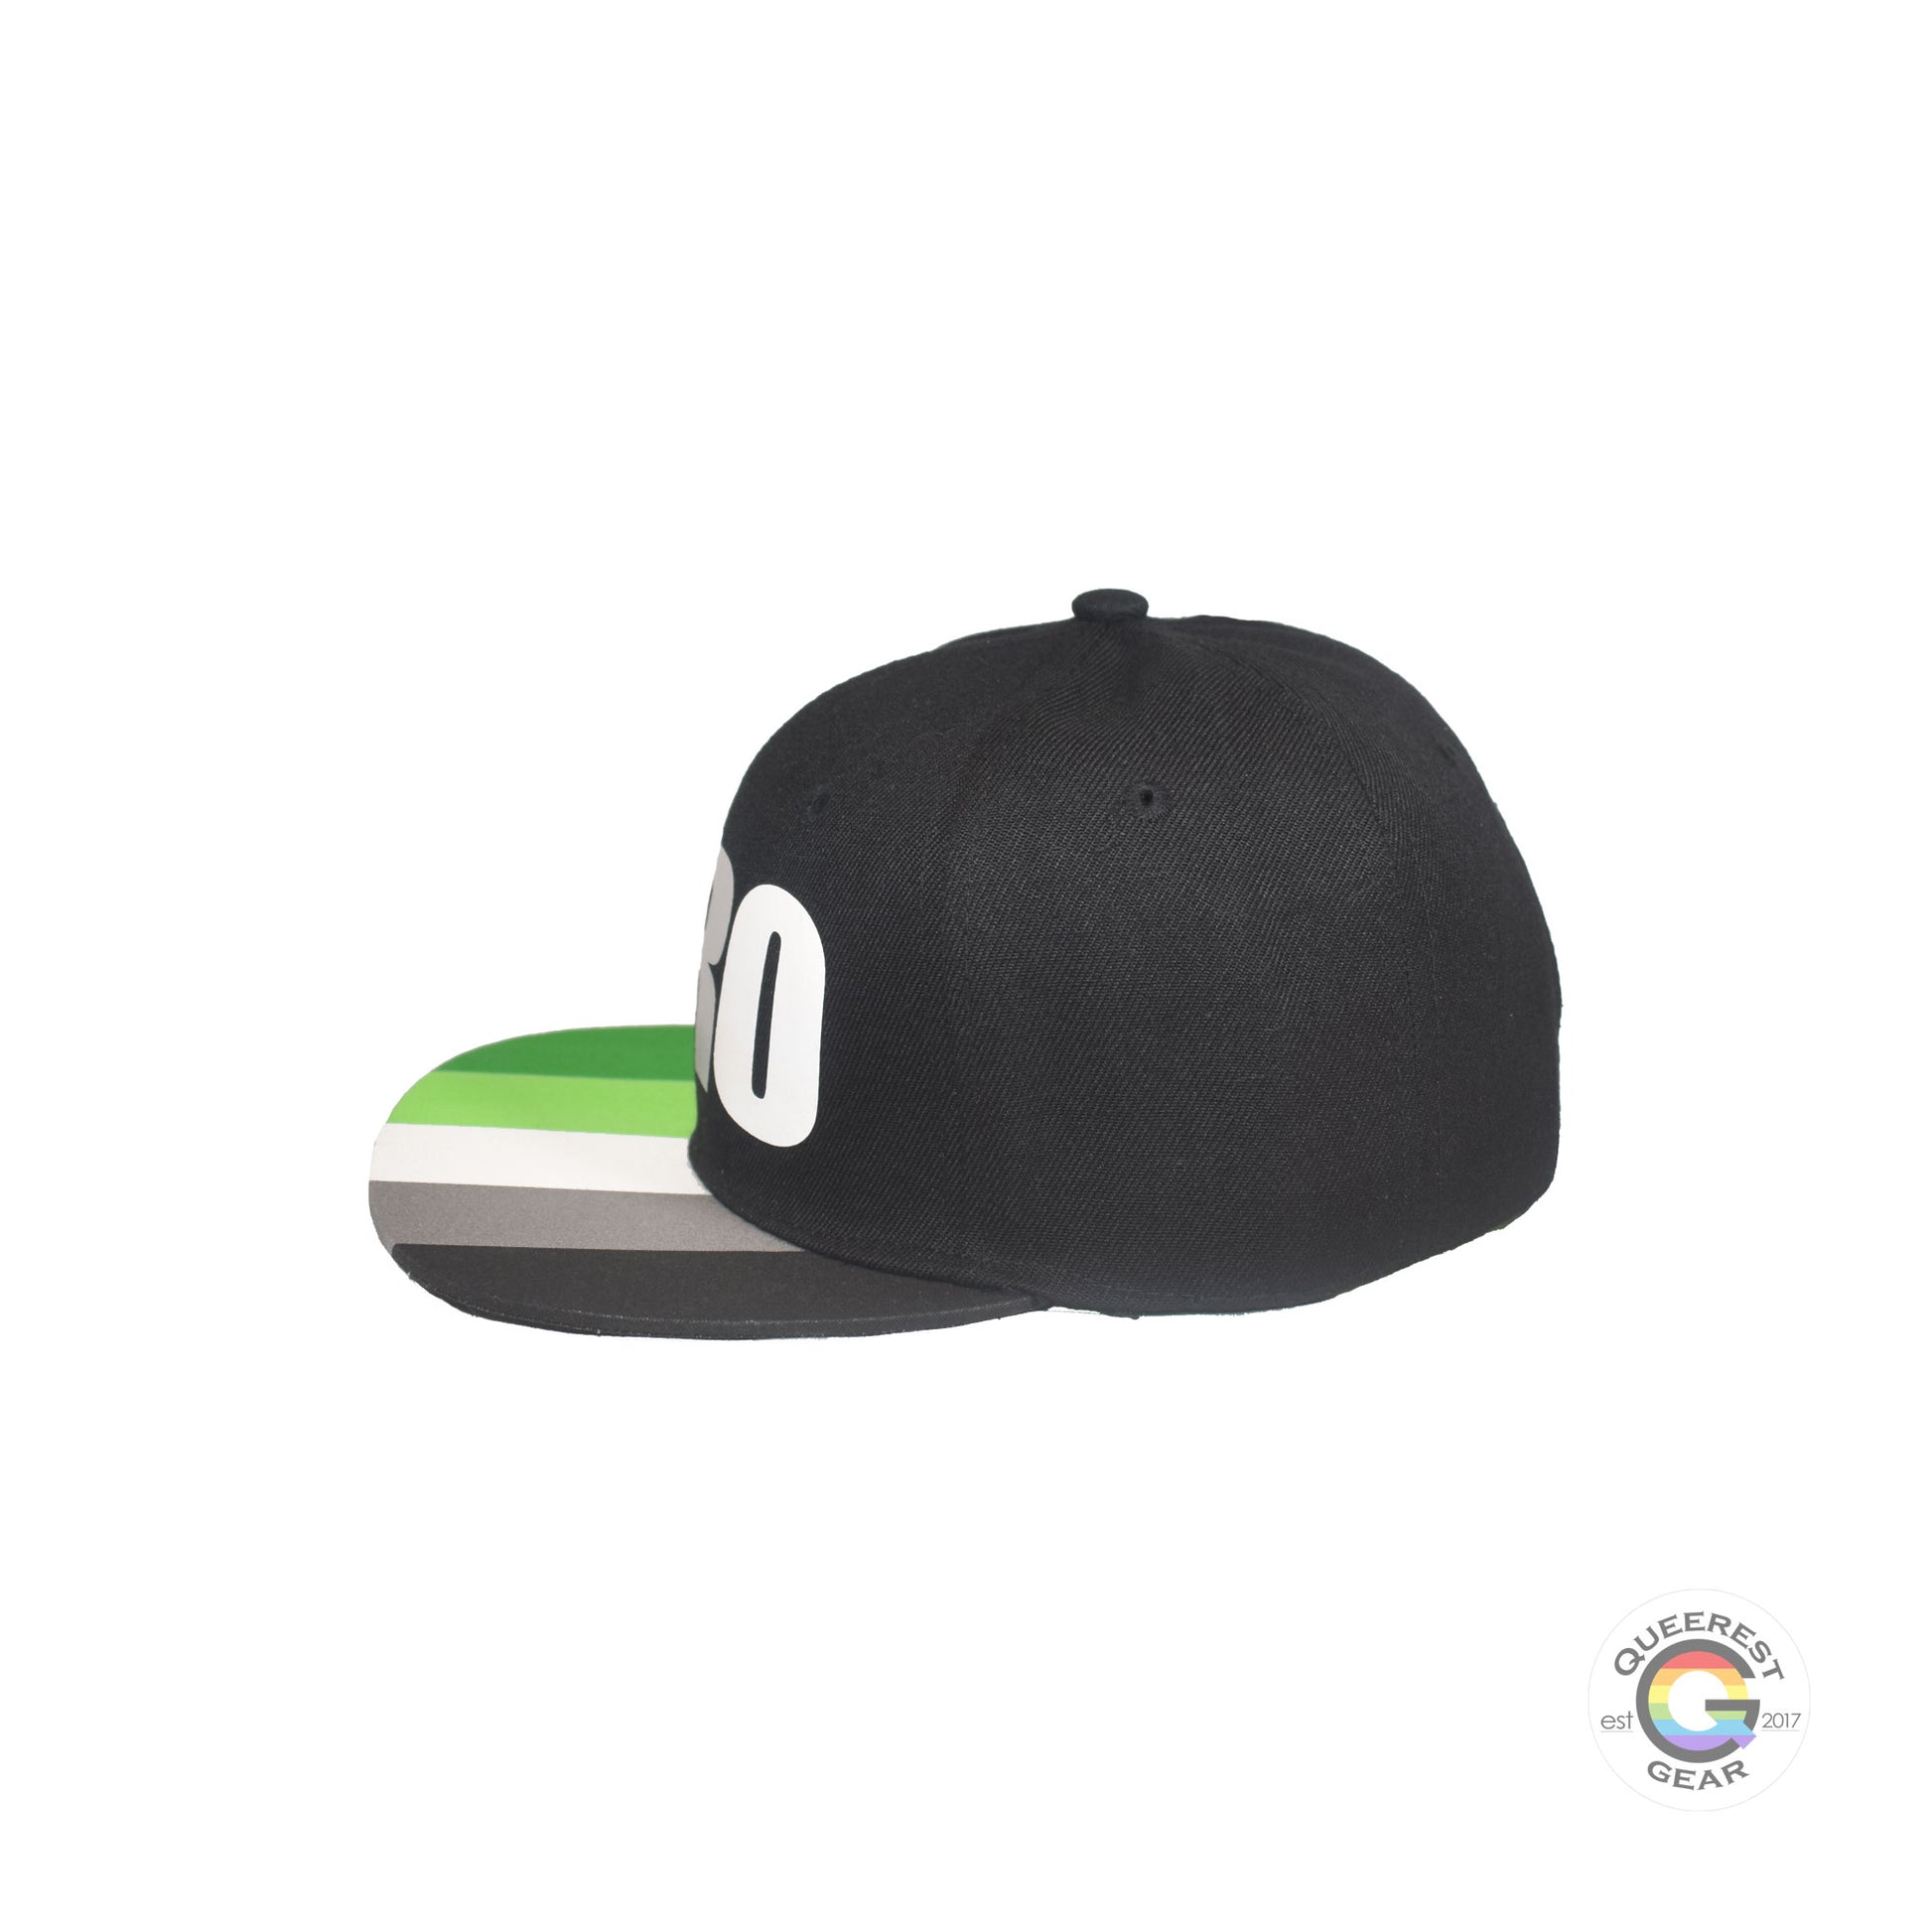 Black flat bill snapback hat. The brim has the aromantic pride flag on both sides and the front of the hat has the word “ARO” in green, grey, and white. Left view